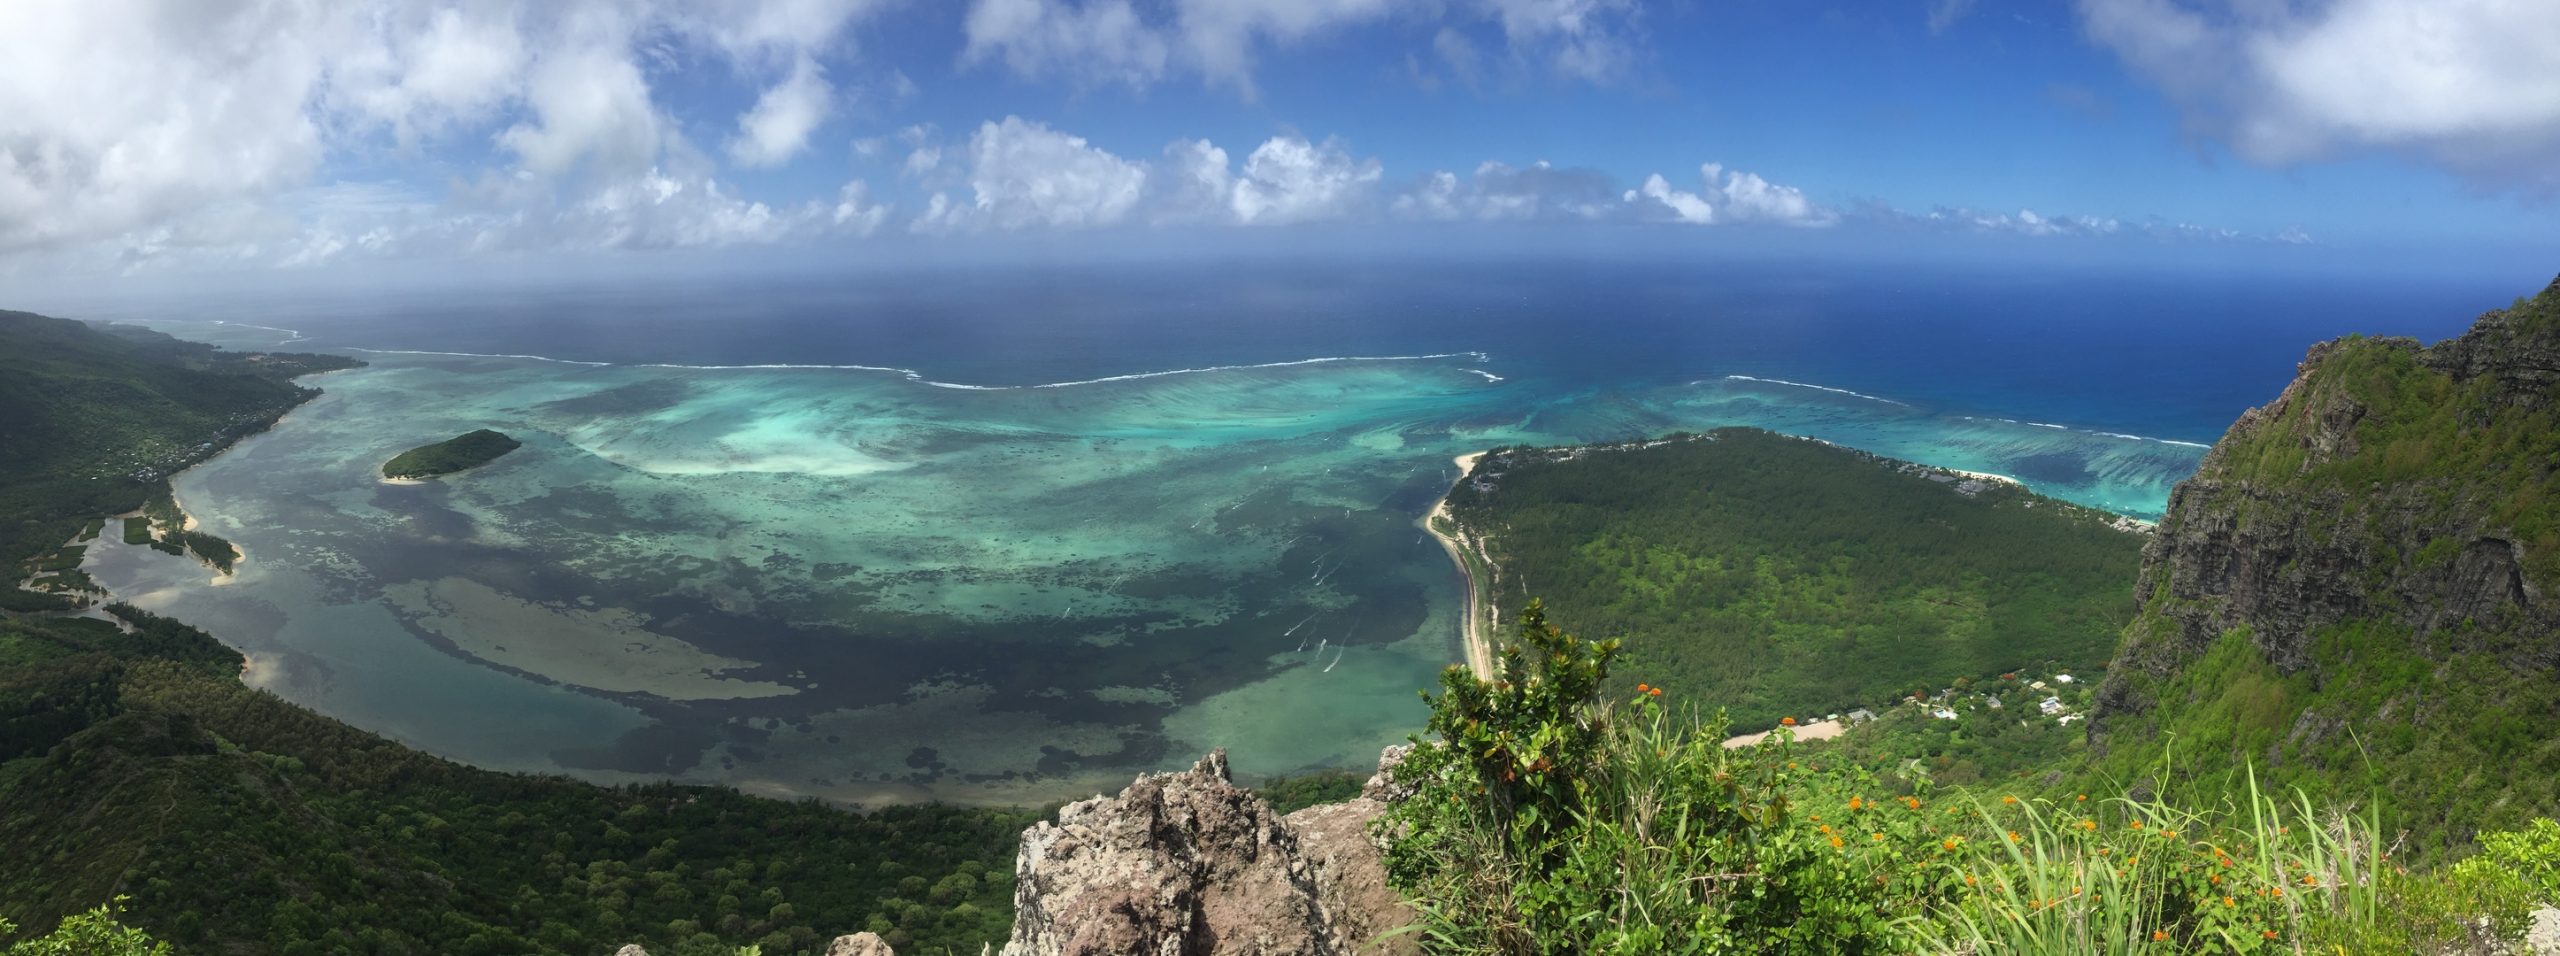 Le Morne Brabant cross :: the view of the sothern lagoon with Passe de La Prairie opening